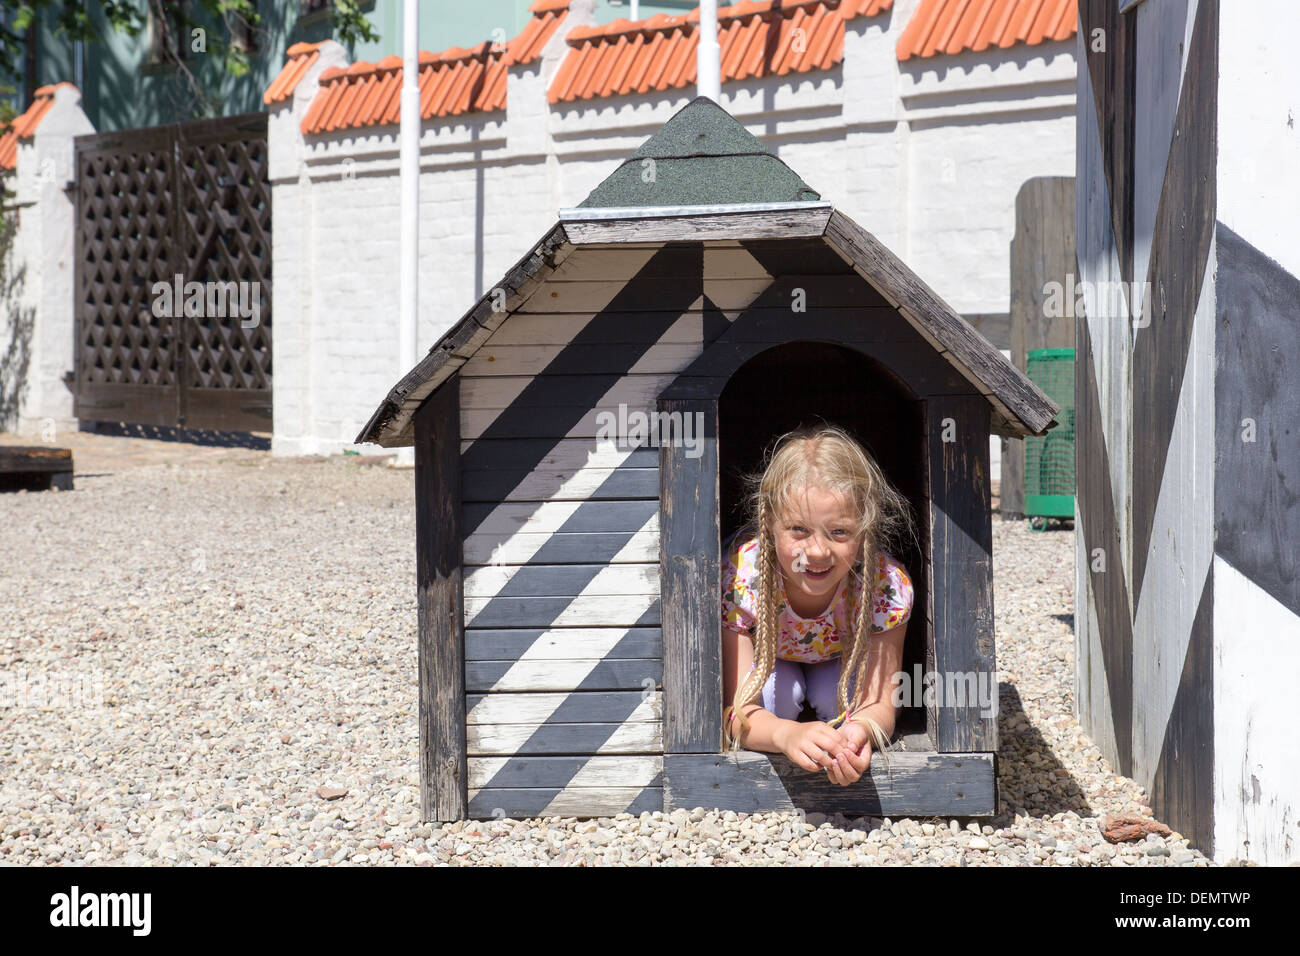 smiling little girl in old wooden dog house Stock Photo